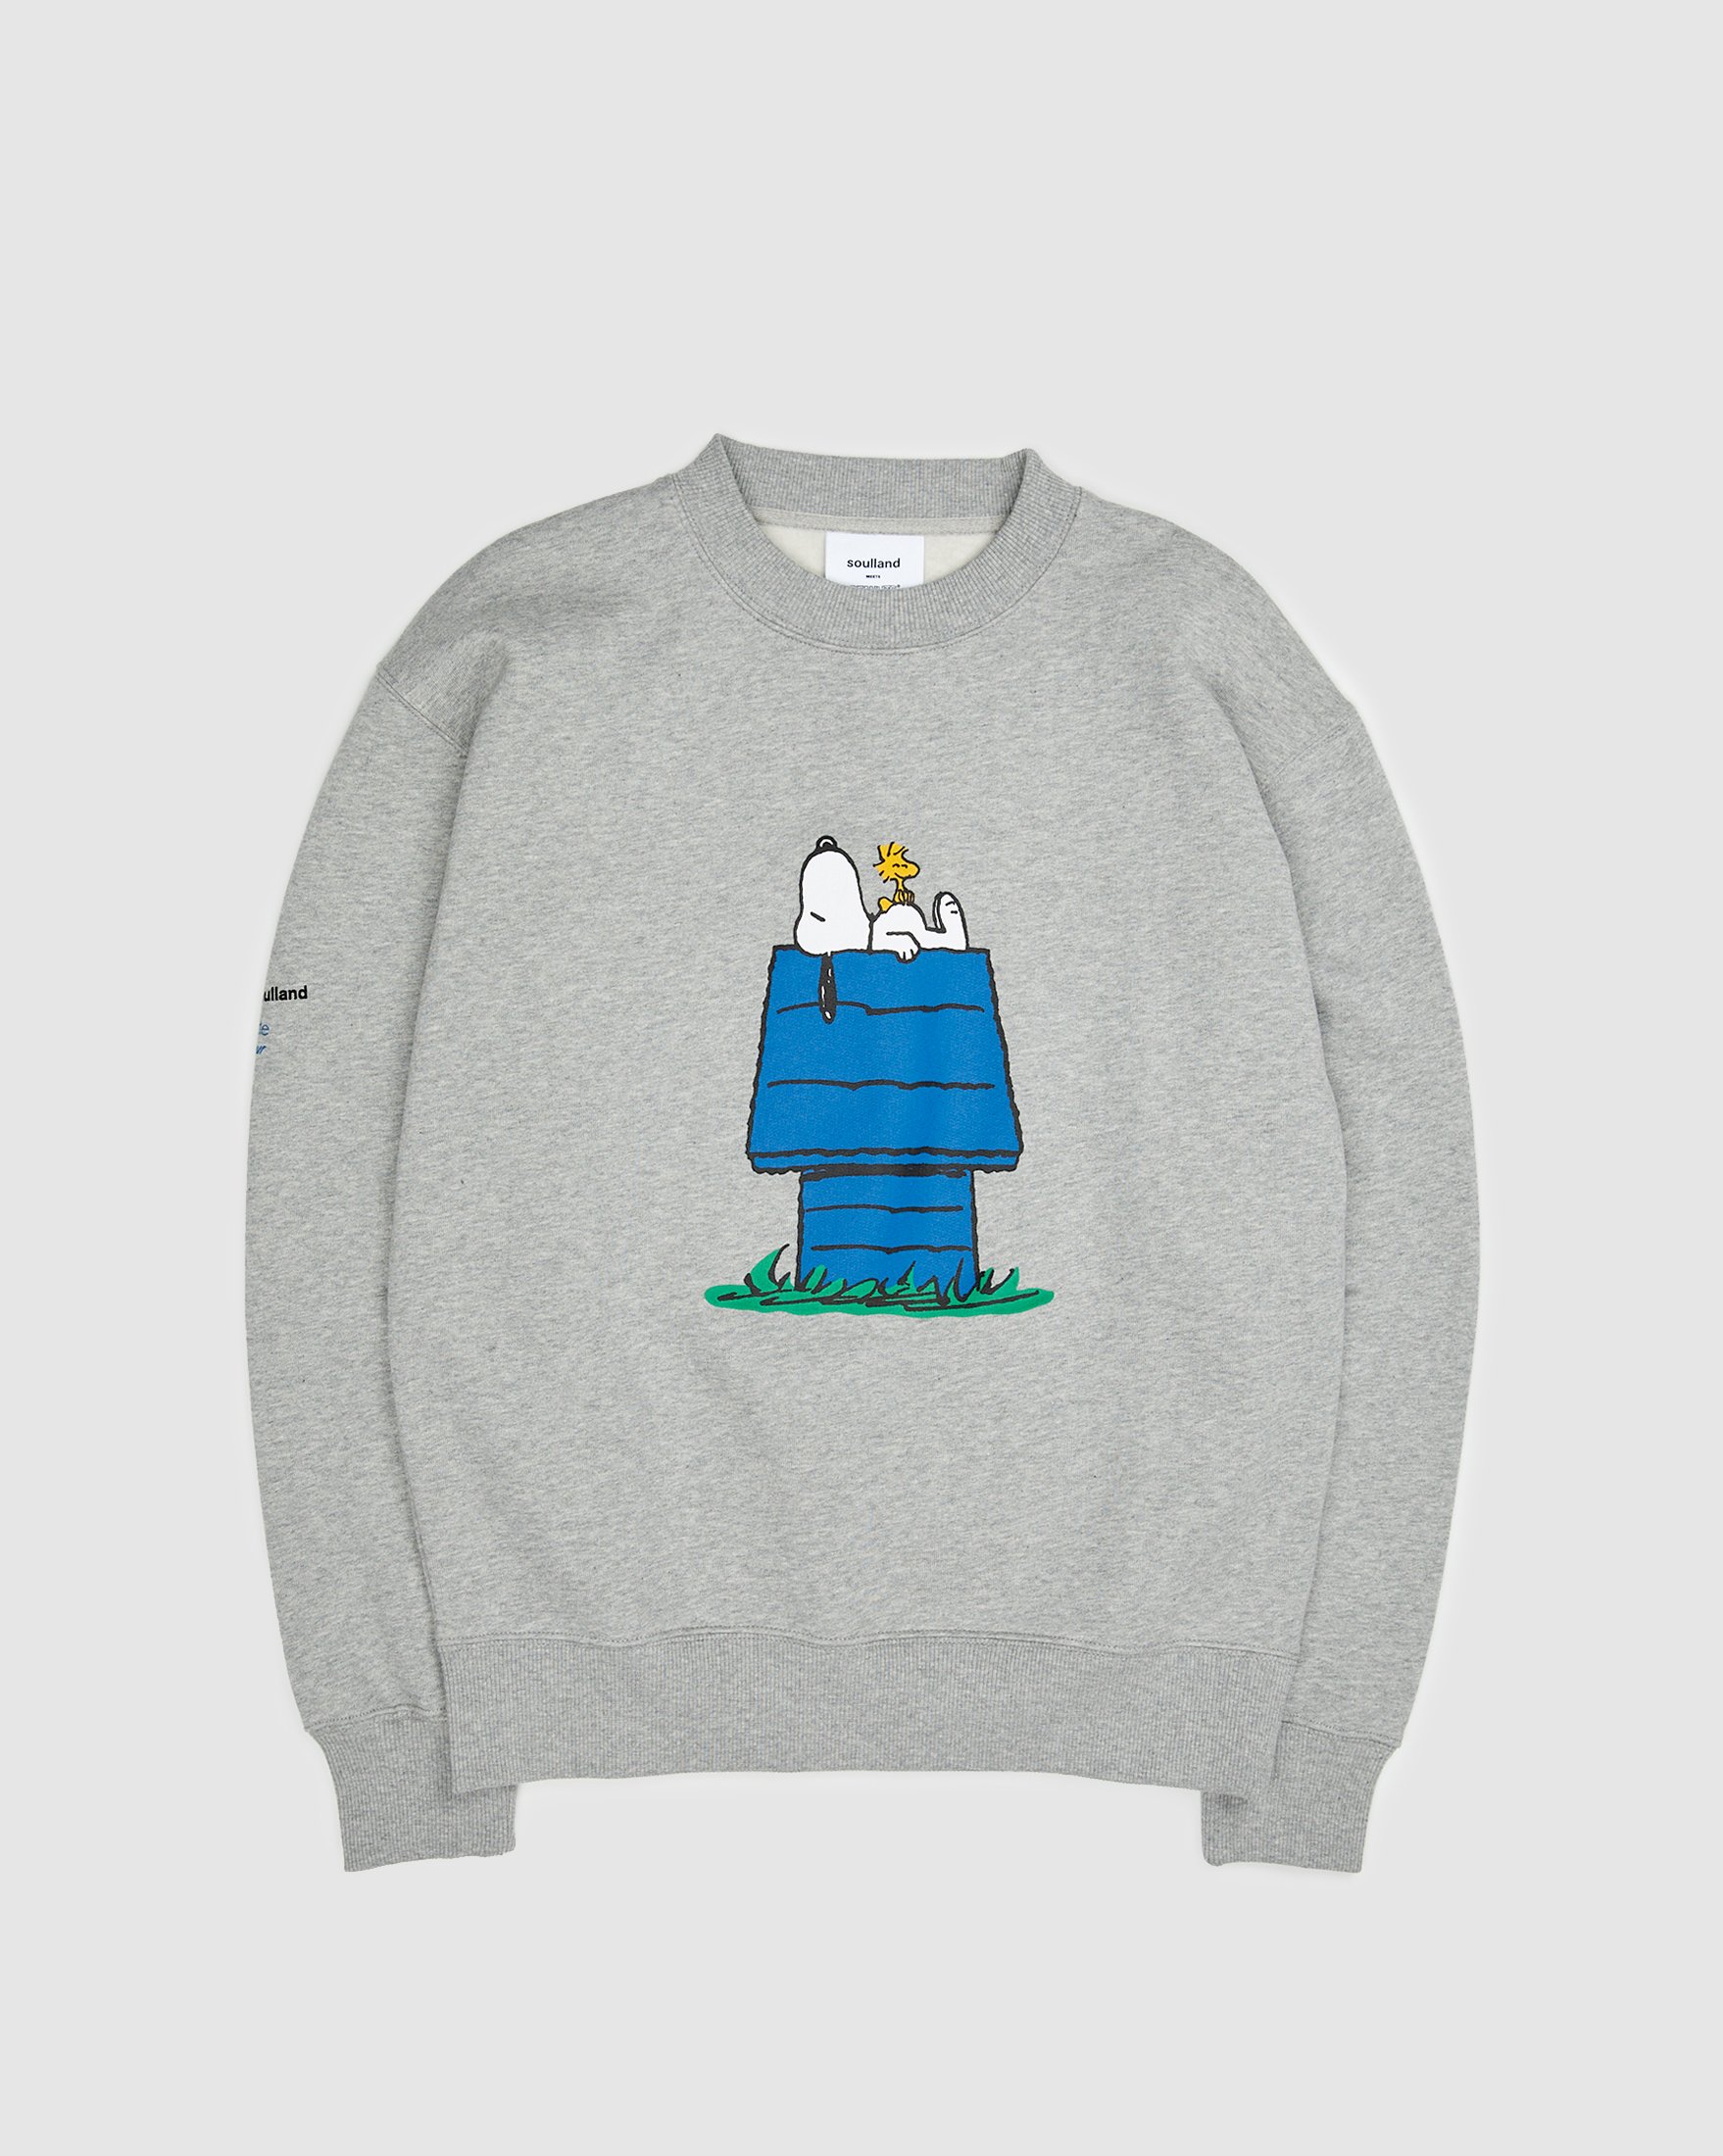 Colette Mon Amour x Soulland - Snoopy Bed Grey Crewneck - Clothing - Grey - Image 1